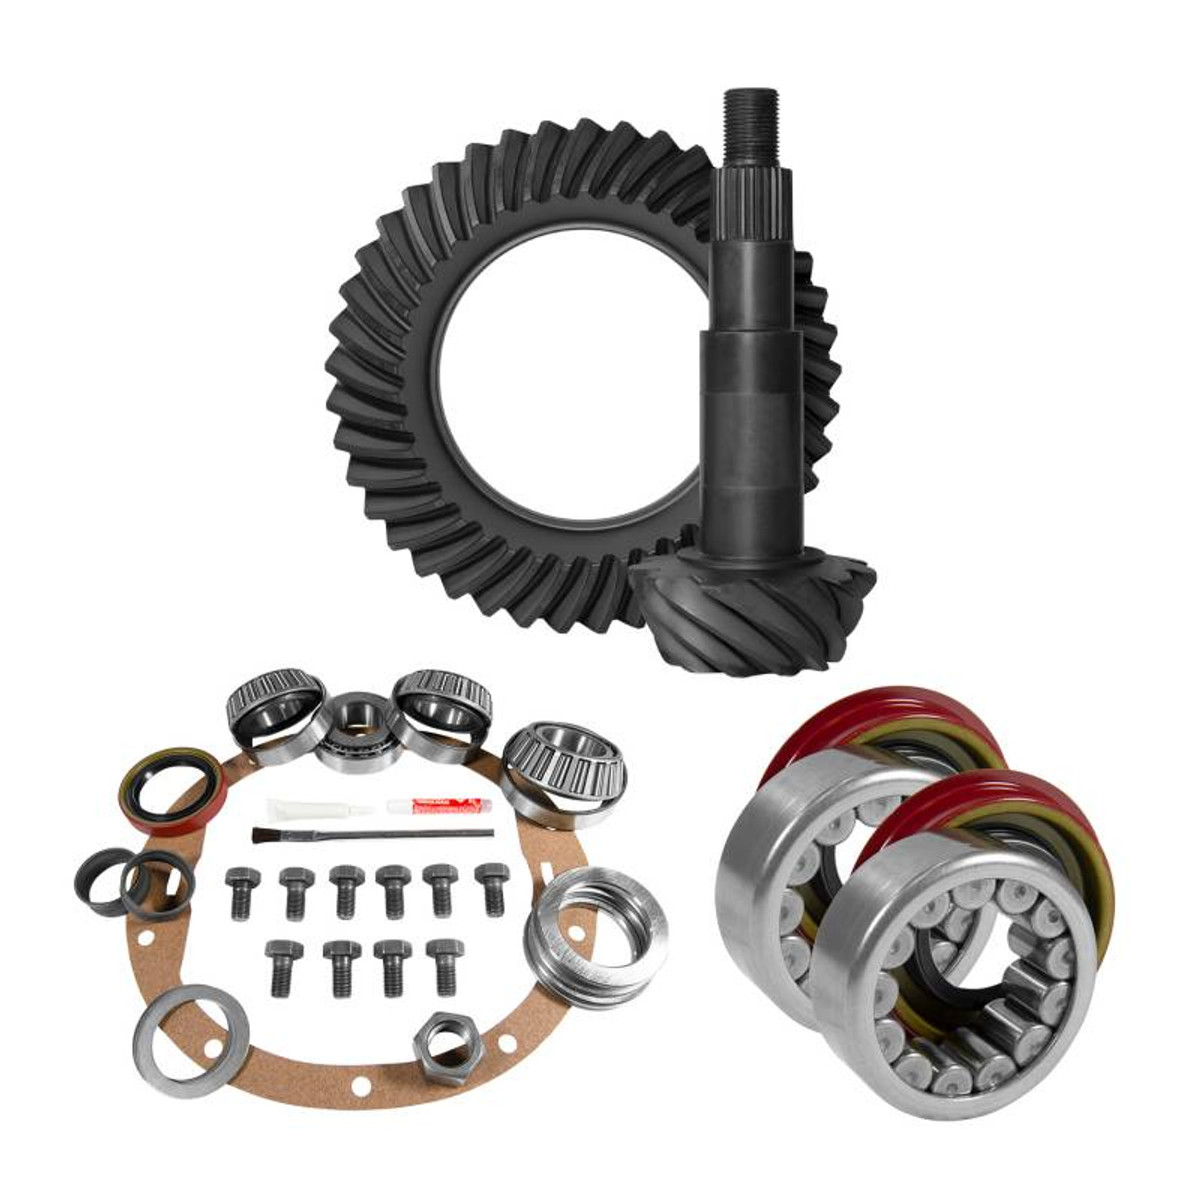 8.5 inch GM 4.11 Rear Ring and Pinion Install Kit Axle Bearings 1.625 inch Case Journal YGK2013